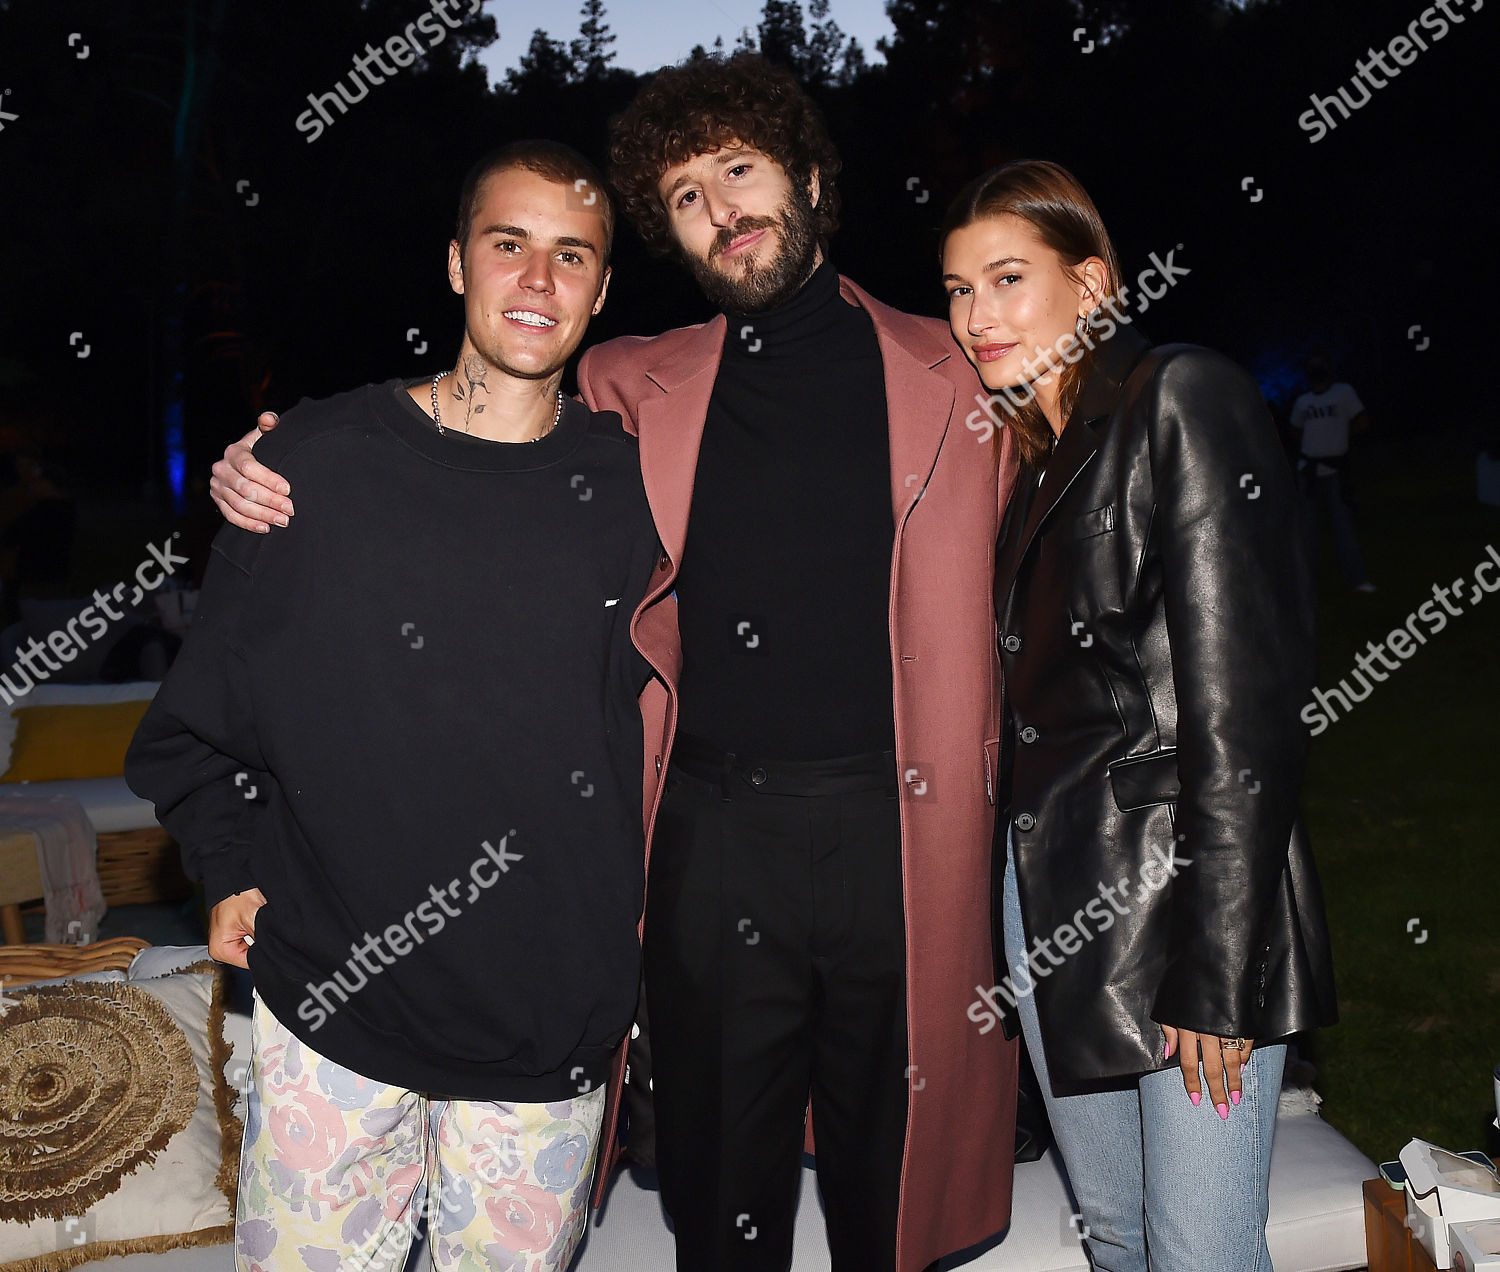 REQUEST JUSTIN AND HAILEY AT DAVE SEASONS 2 PREMOERW